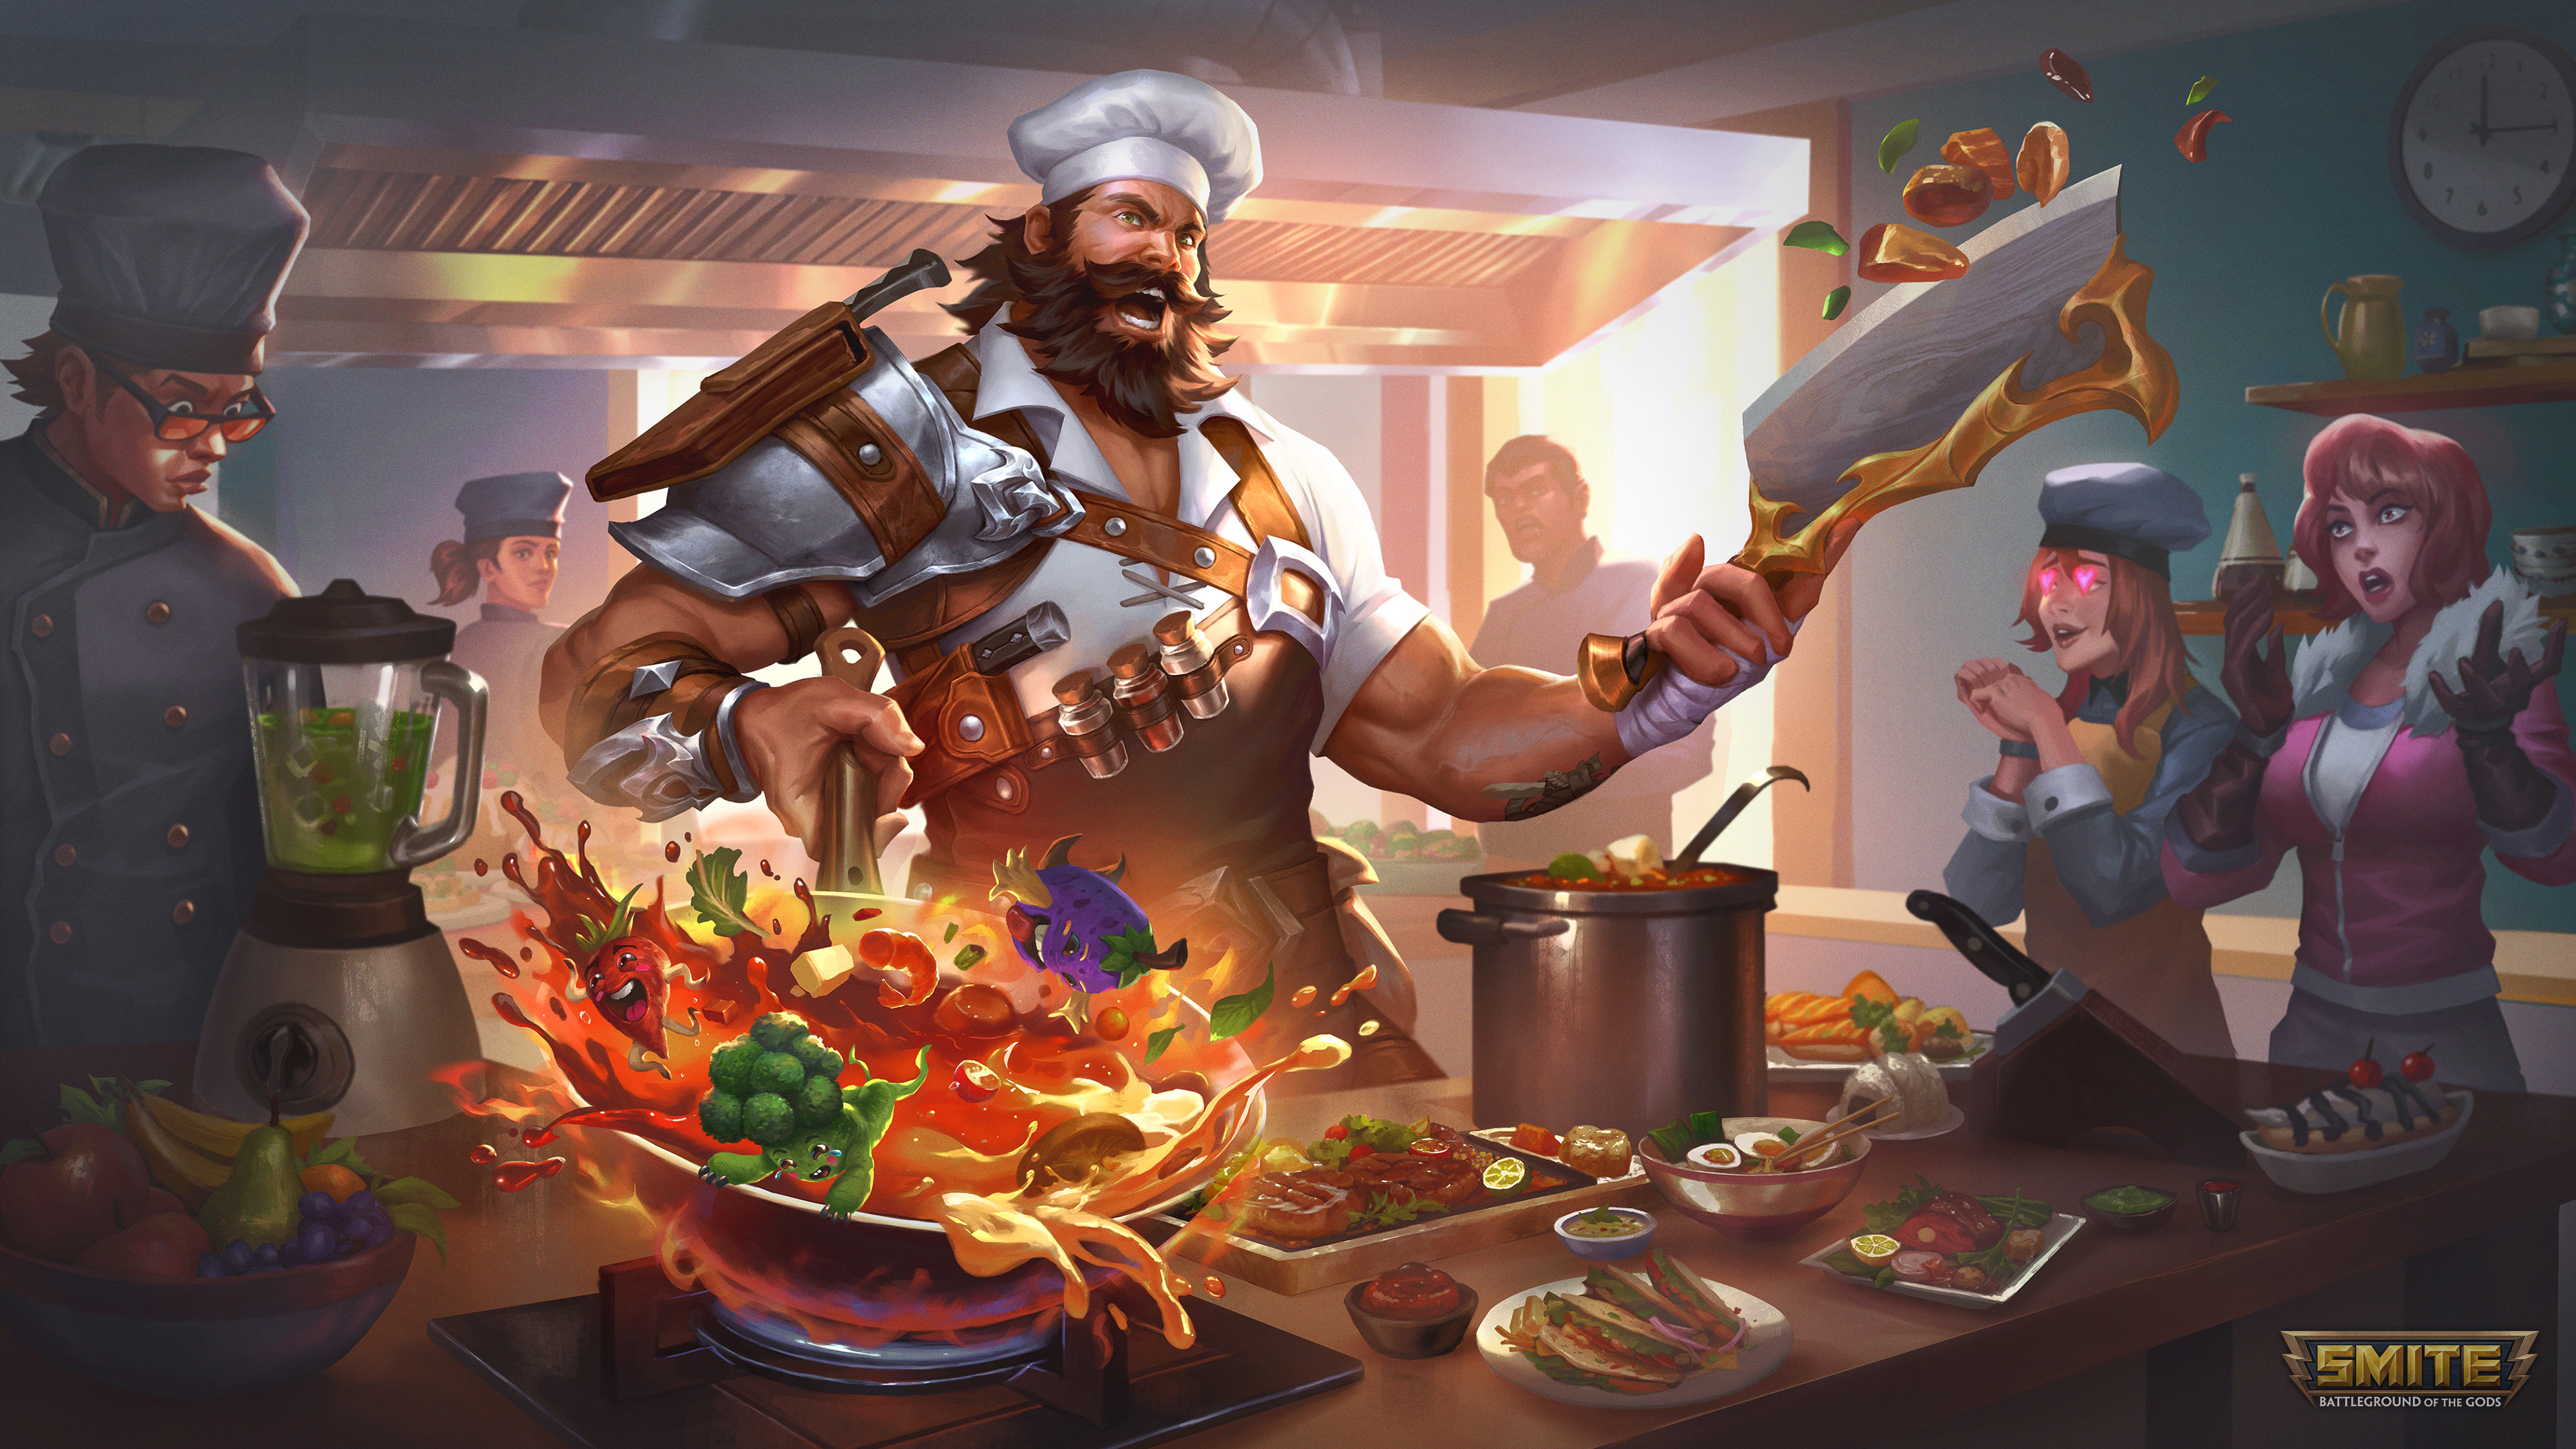 Smite Moba Video Game Characters Video Game Art Video Game Man Video Games Cooking Chefs Hat Muscles 3840x2160